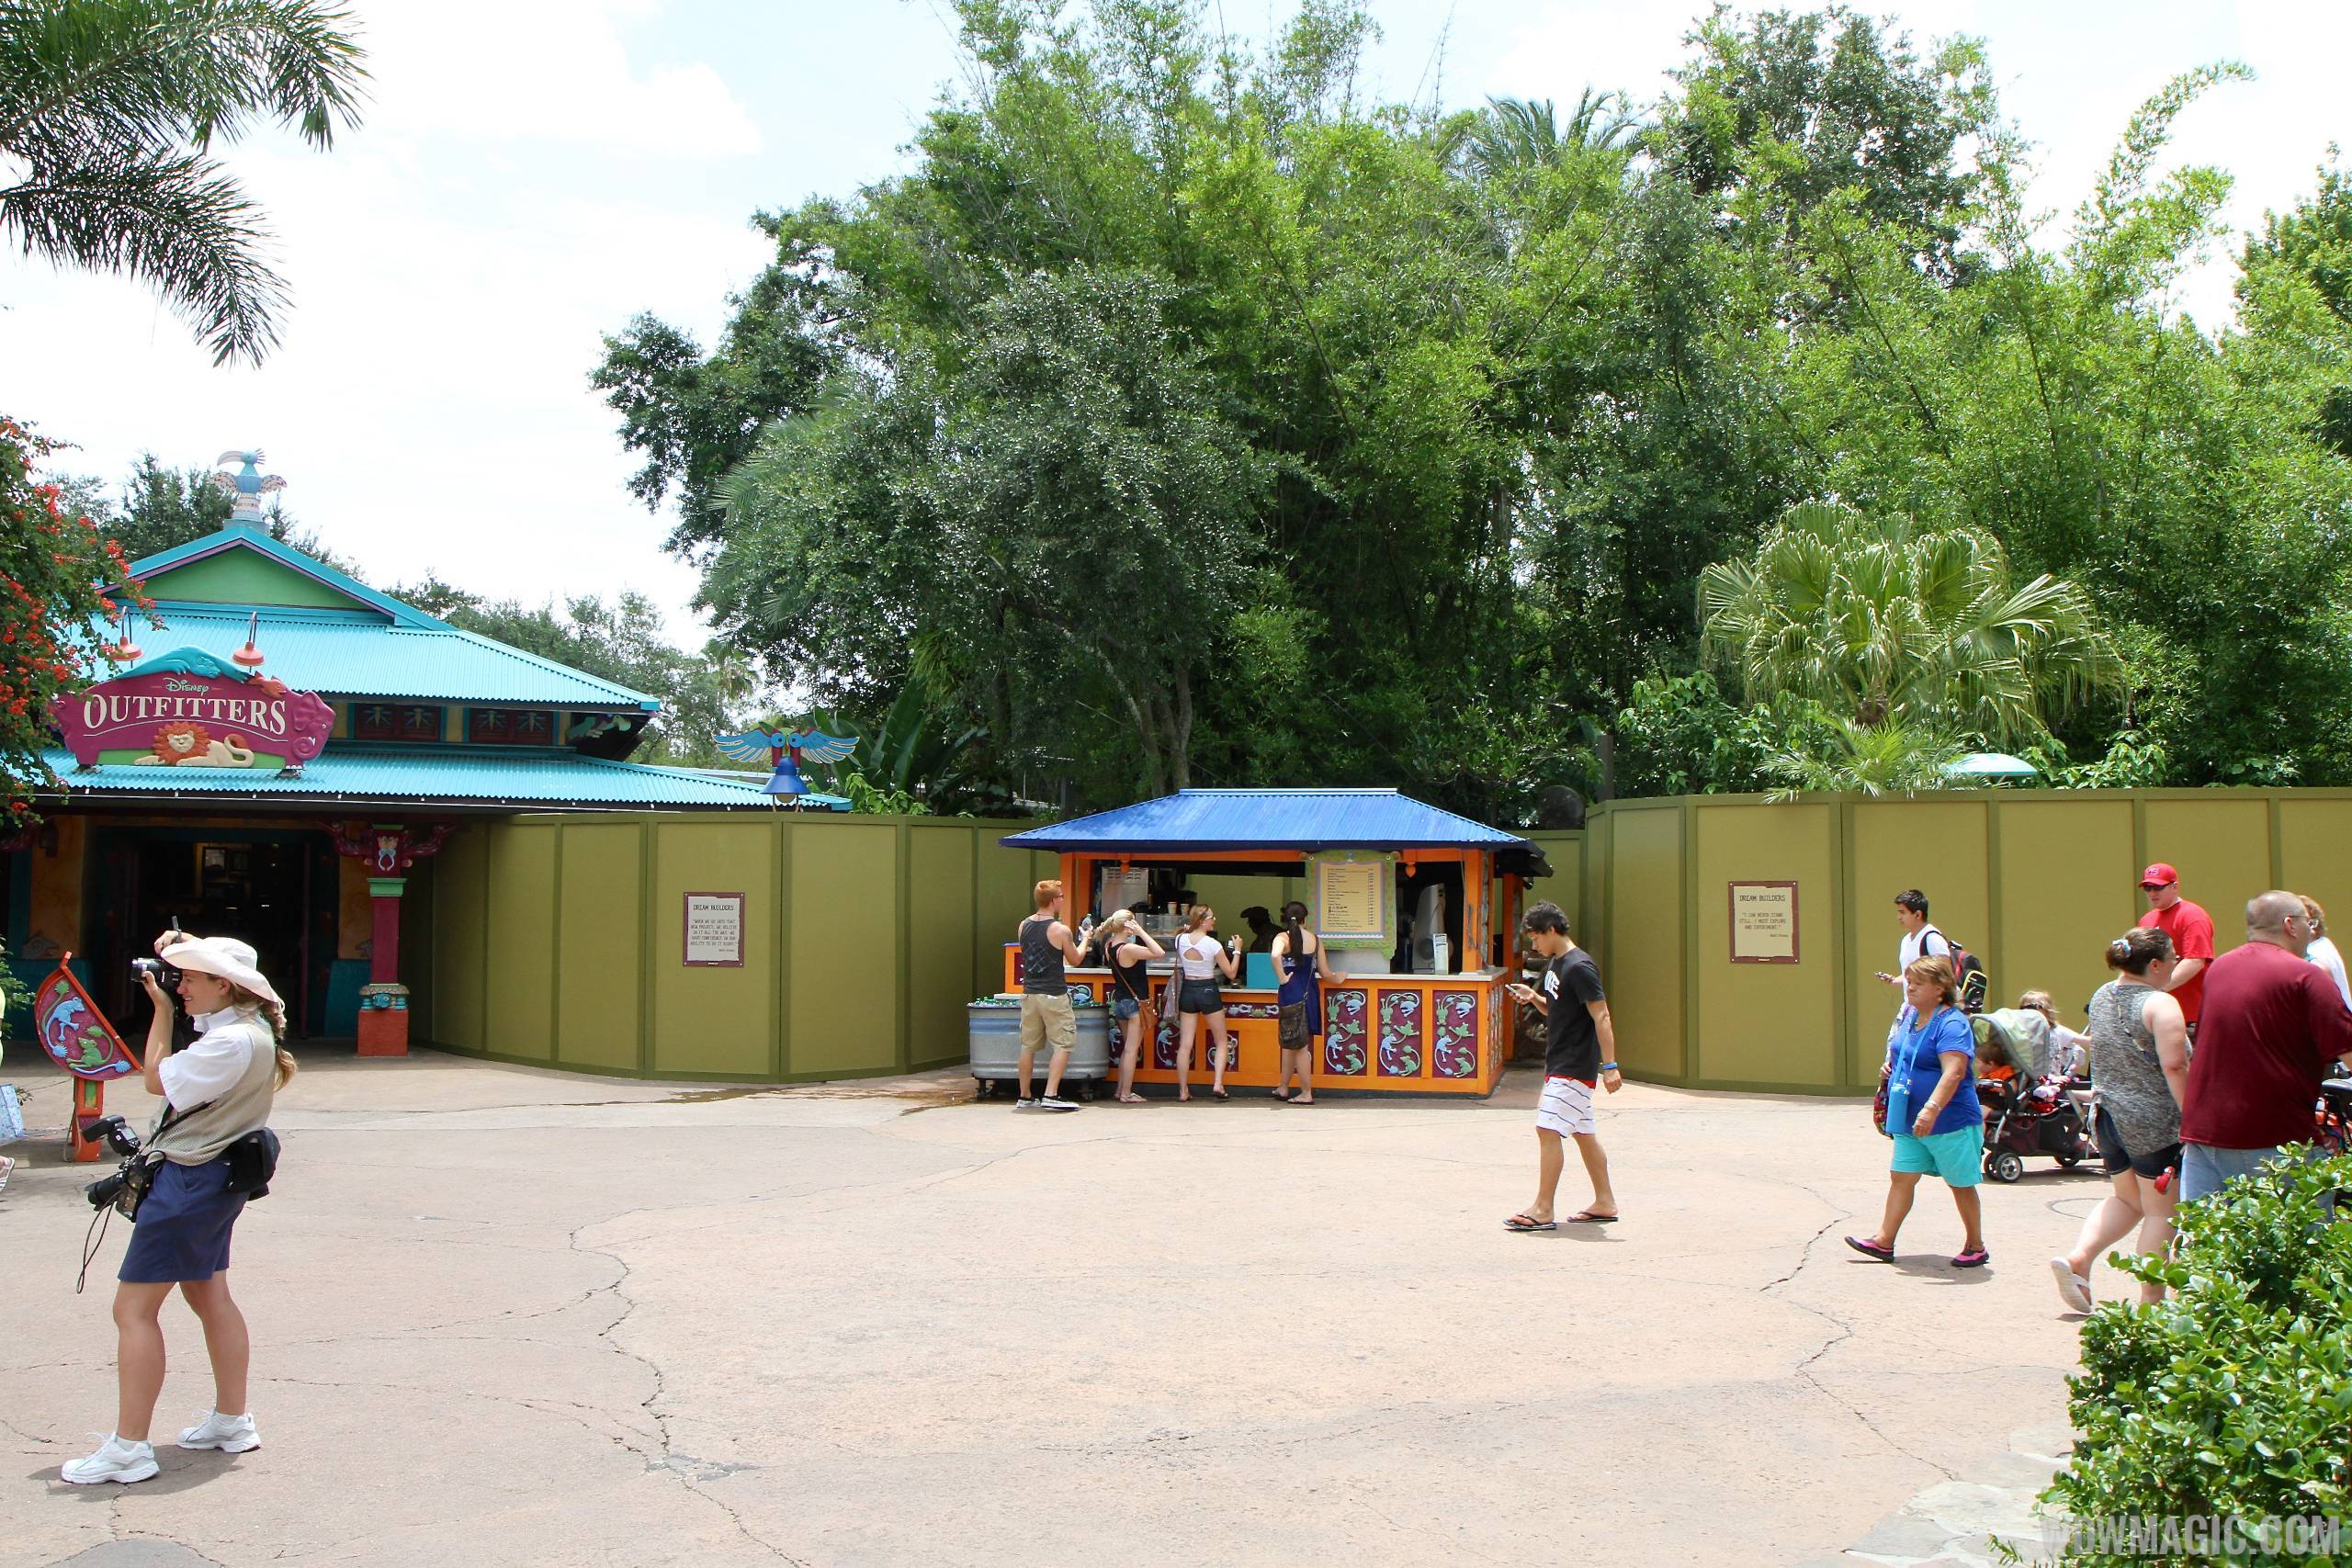 PHOTOS - Construction walls up around Disney Outfitters at Disney's Animal Kingdom as expansion gets underway